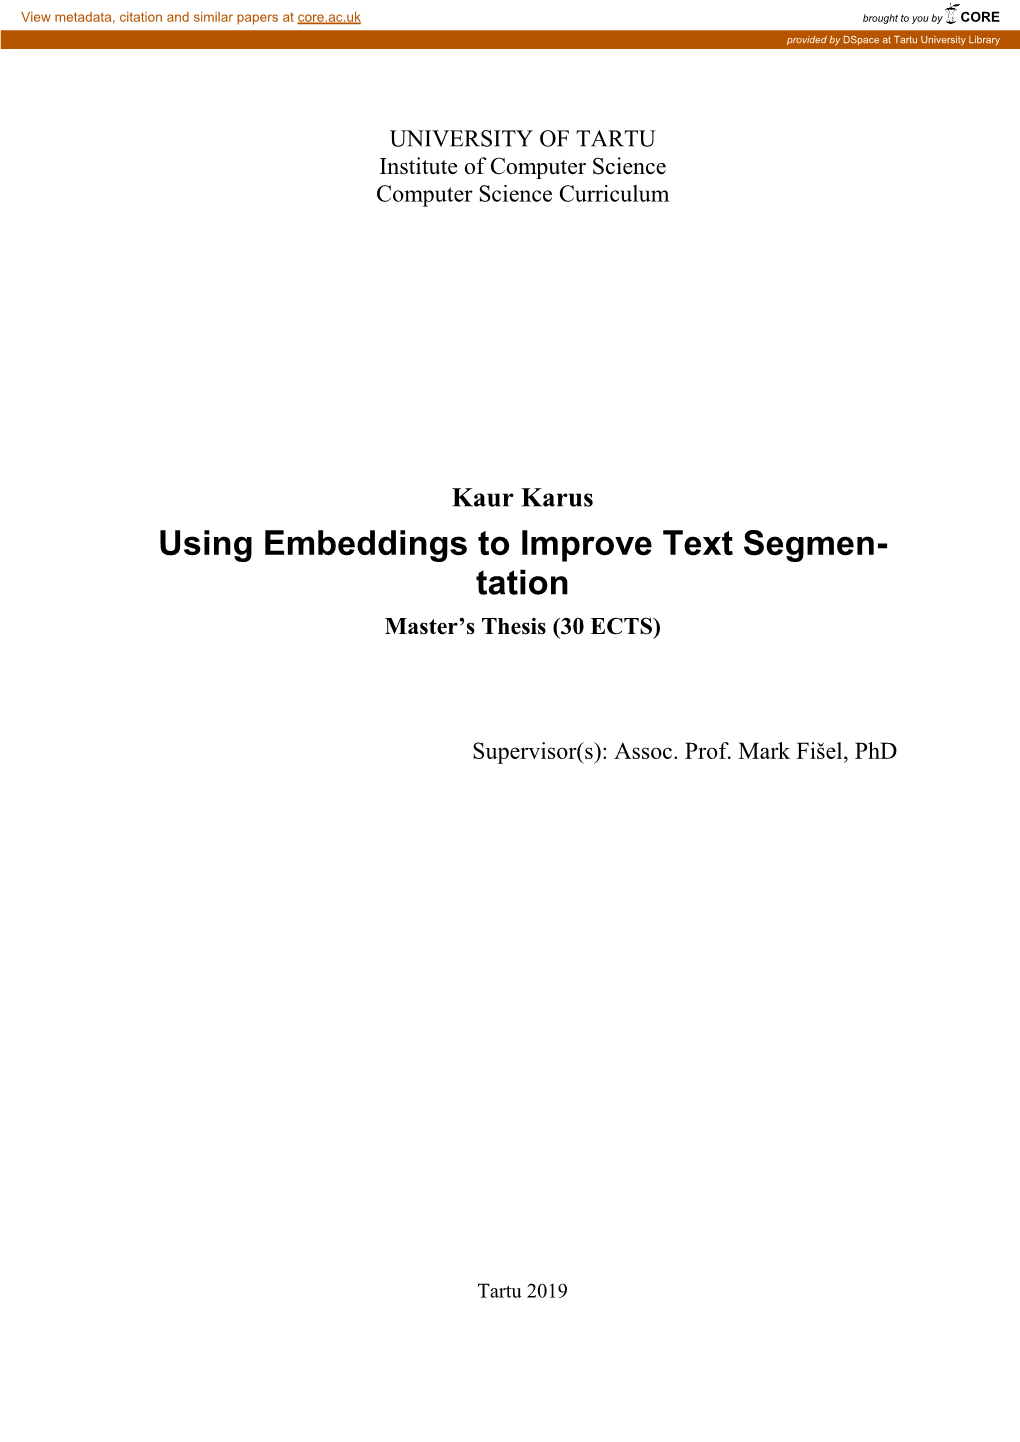 Using Embeddings to Improve Text Segmentation Abstract: Textual Data Is Often an Unstructured Collection of Sentences and Thus Difficult to Use for Many Purposes